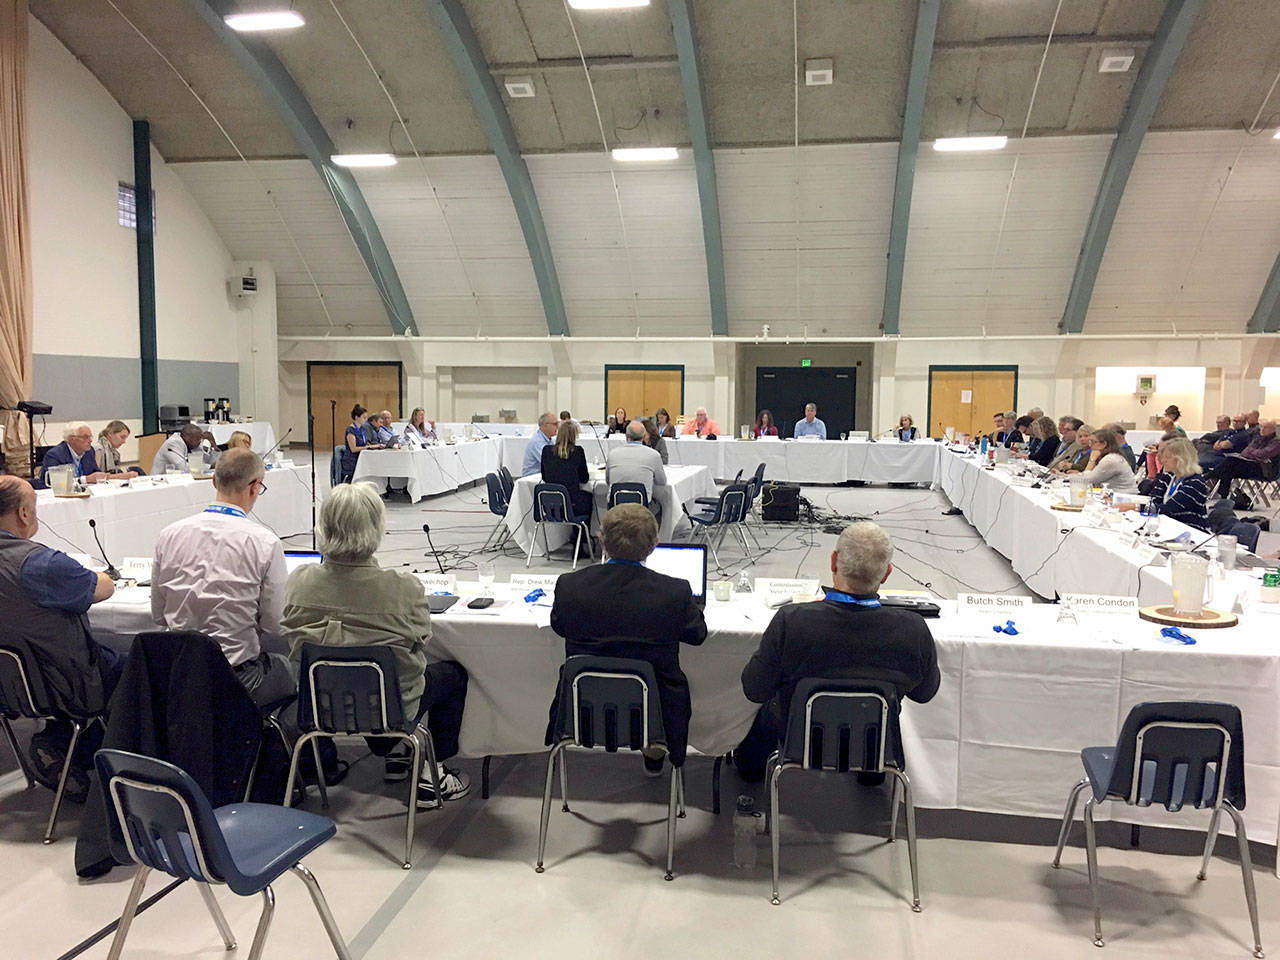 Members of Gov. Jay Inslee’s Southern Resident Killer Whale Task Force meet at the Vern Burton Community Center in Port Angeles on Monday. (Rob Ollikainen/Peninsula Daily News)